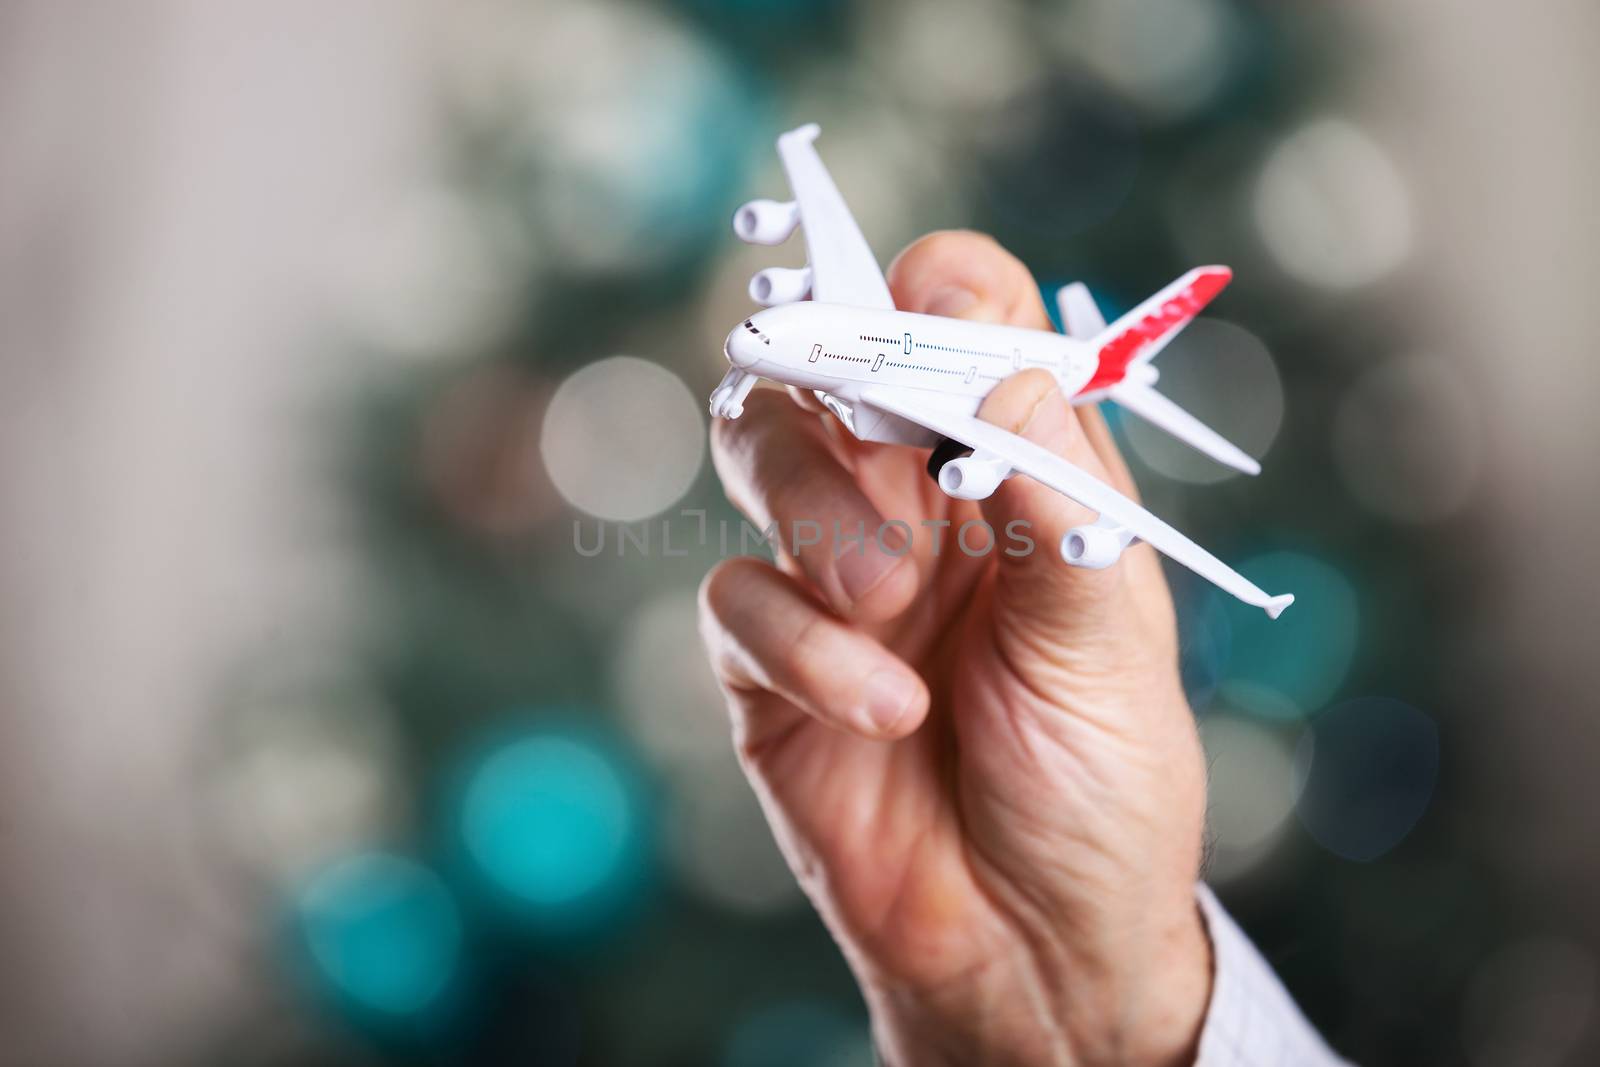 Closeup of man hand holding model of airplane on a Christmas background